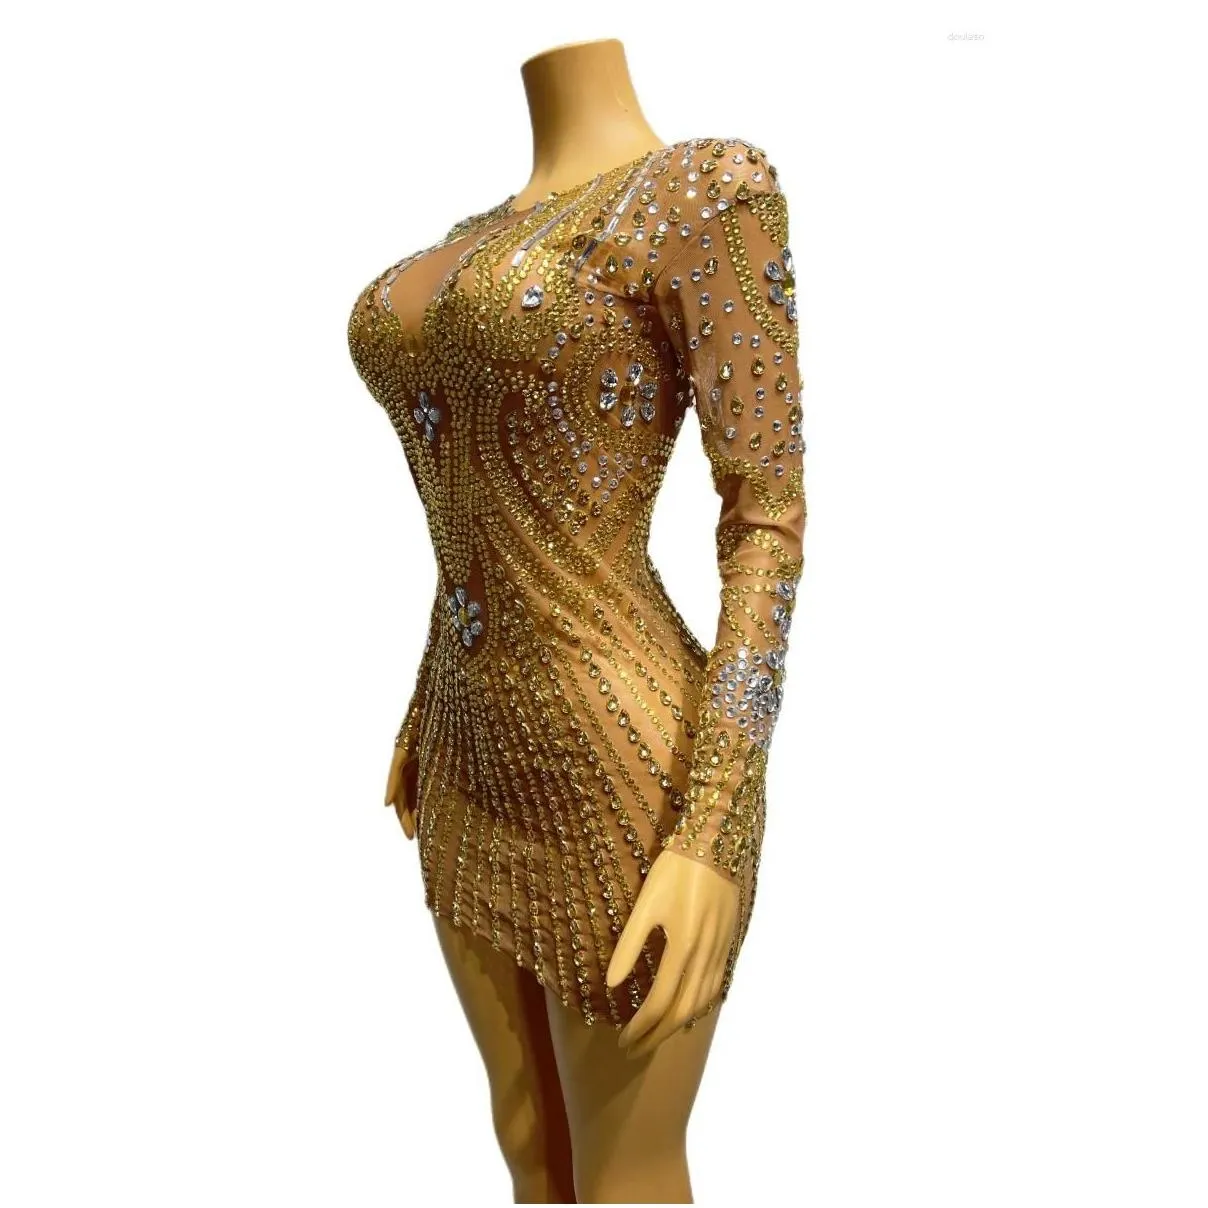 stage wear luxury gold rhinestone mesh stretch sexy tight fitting short dress bar singer performance party celebrate costume